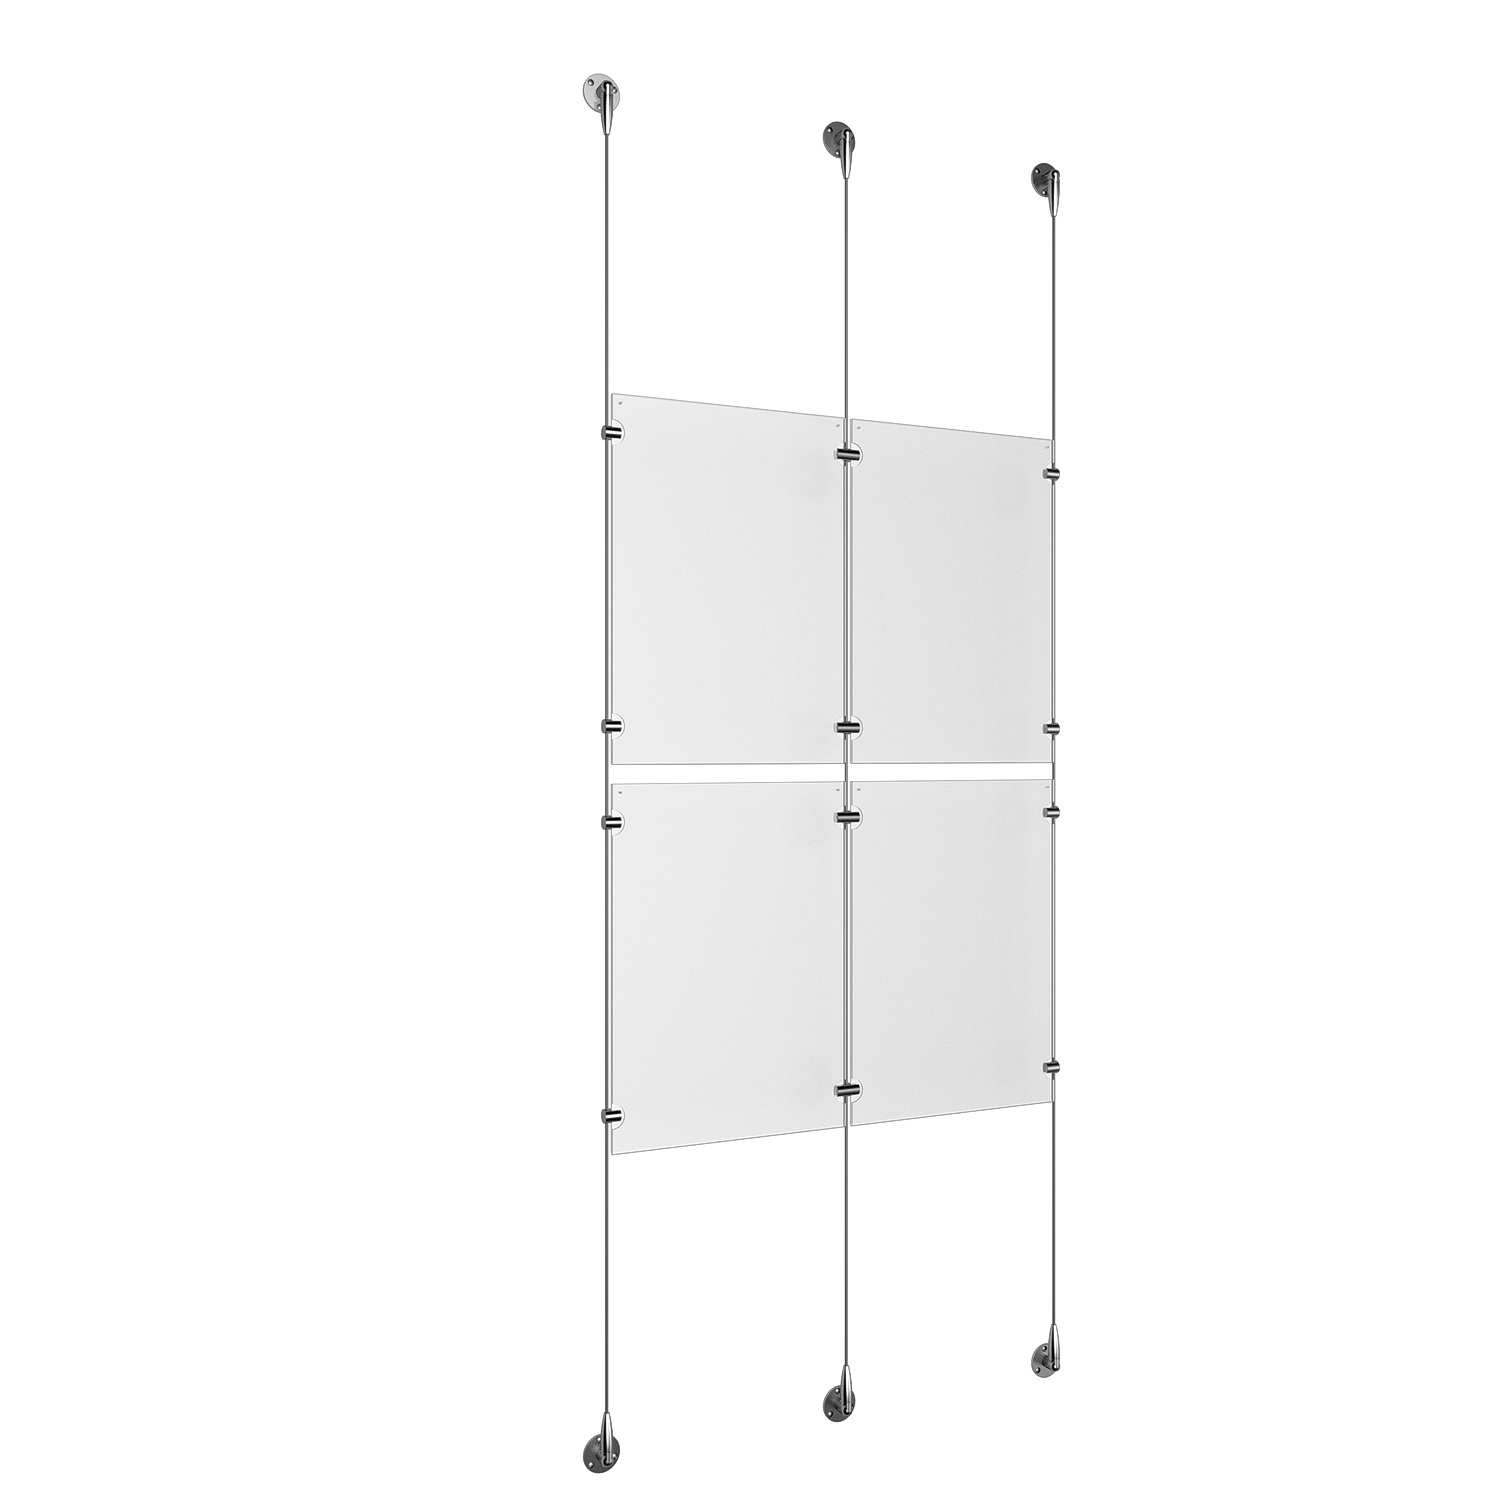 (4) 11'' Width x 17'' Height Clear Acrylic Frame & (3) Stainless Steel Satin Brushed Adjustable Angle Signature 1/8'' Cable Systems with (8) Single-Sided Panel Grippers (4) Double-Sided Panel Grippers